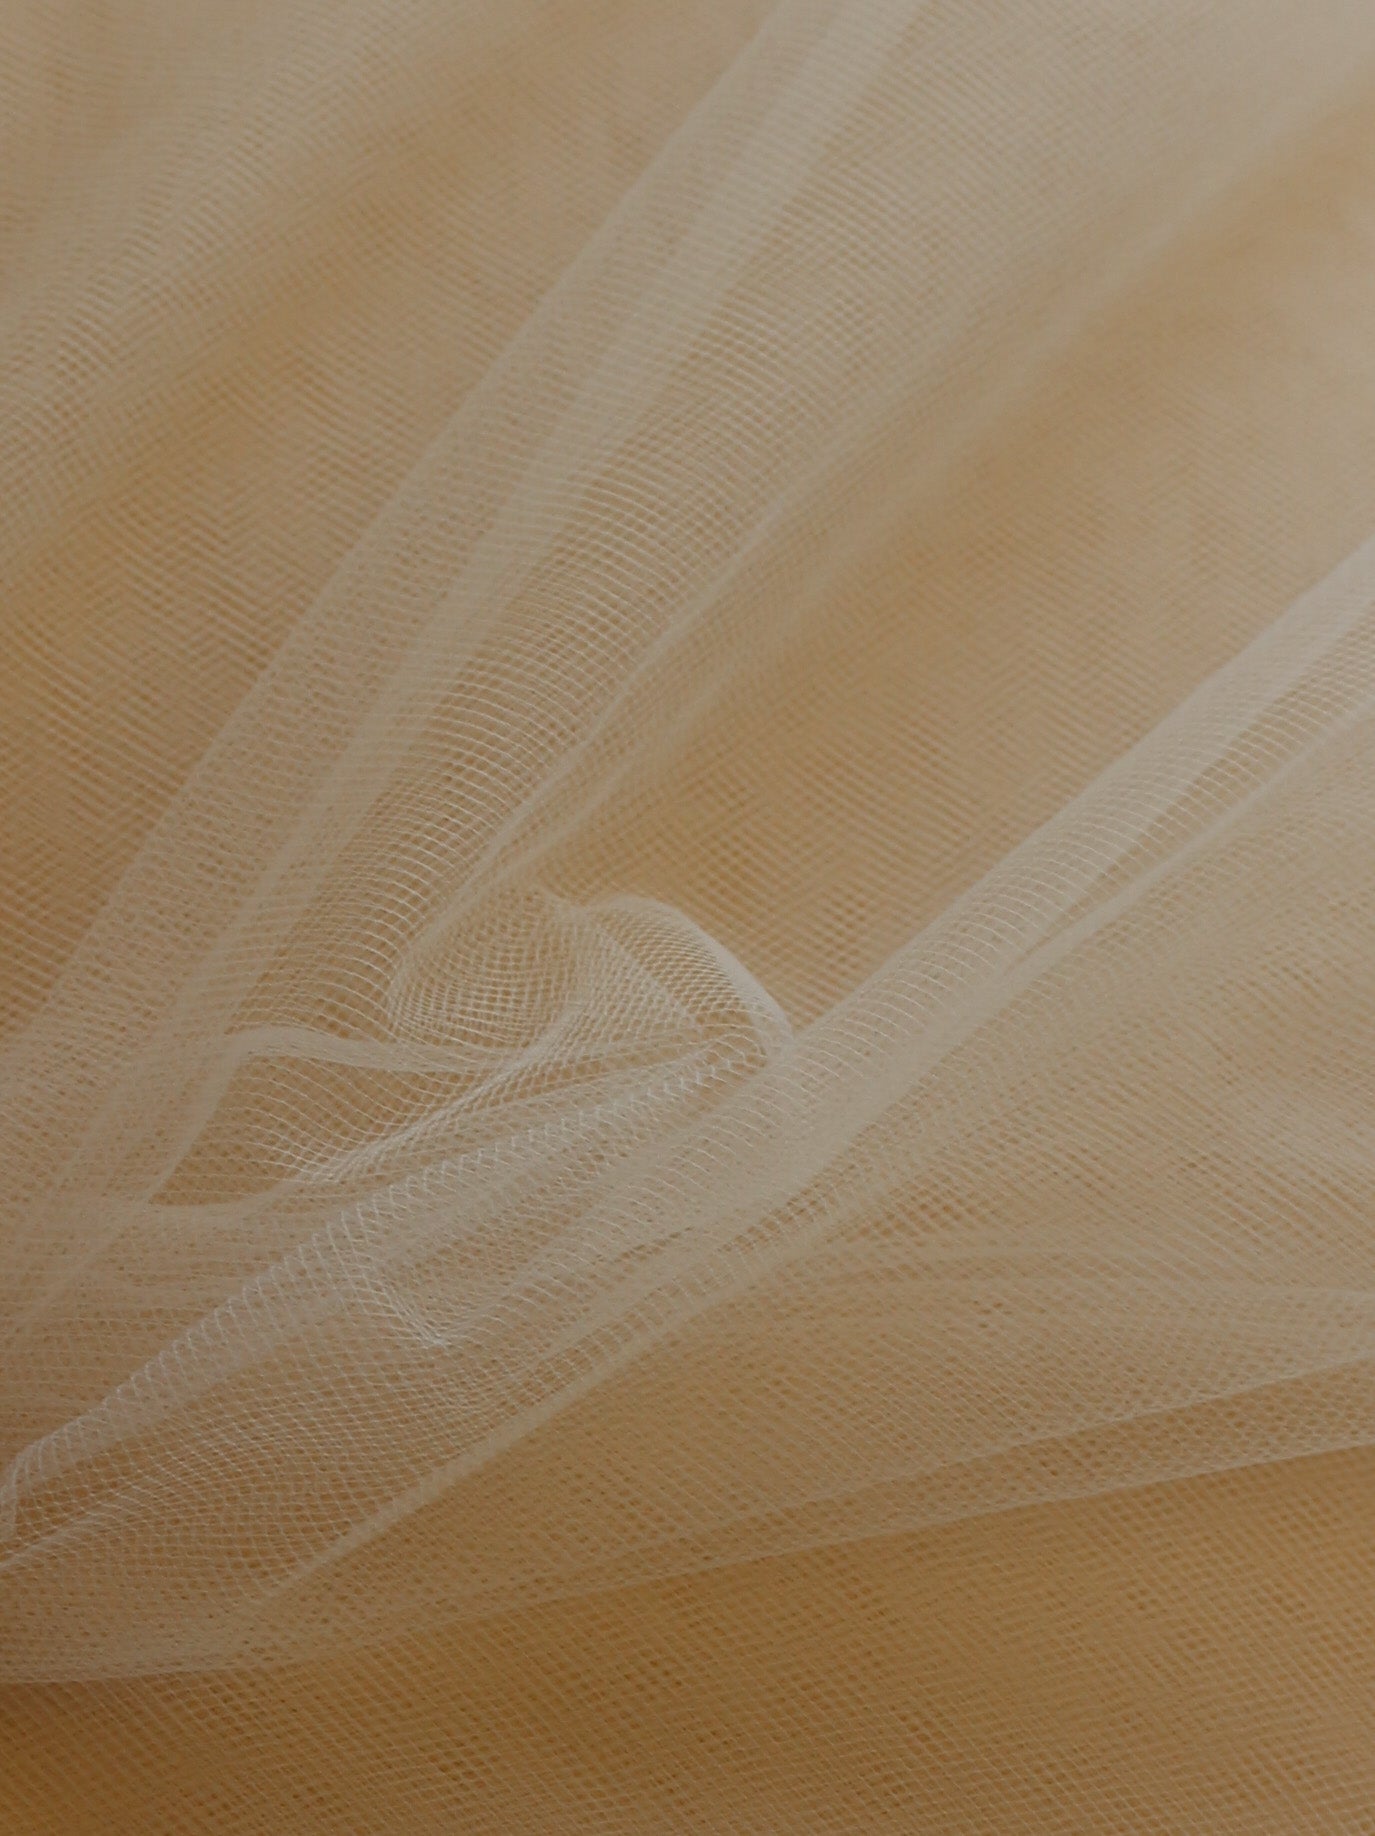 Champagne Bridal Tulle for Veils – Romance